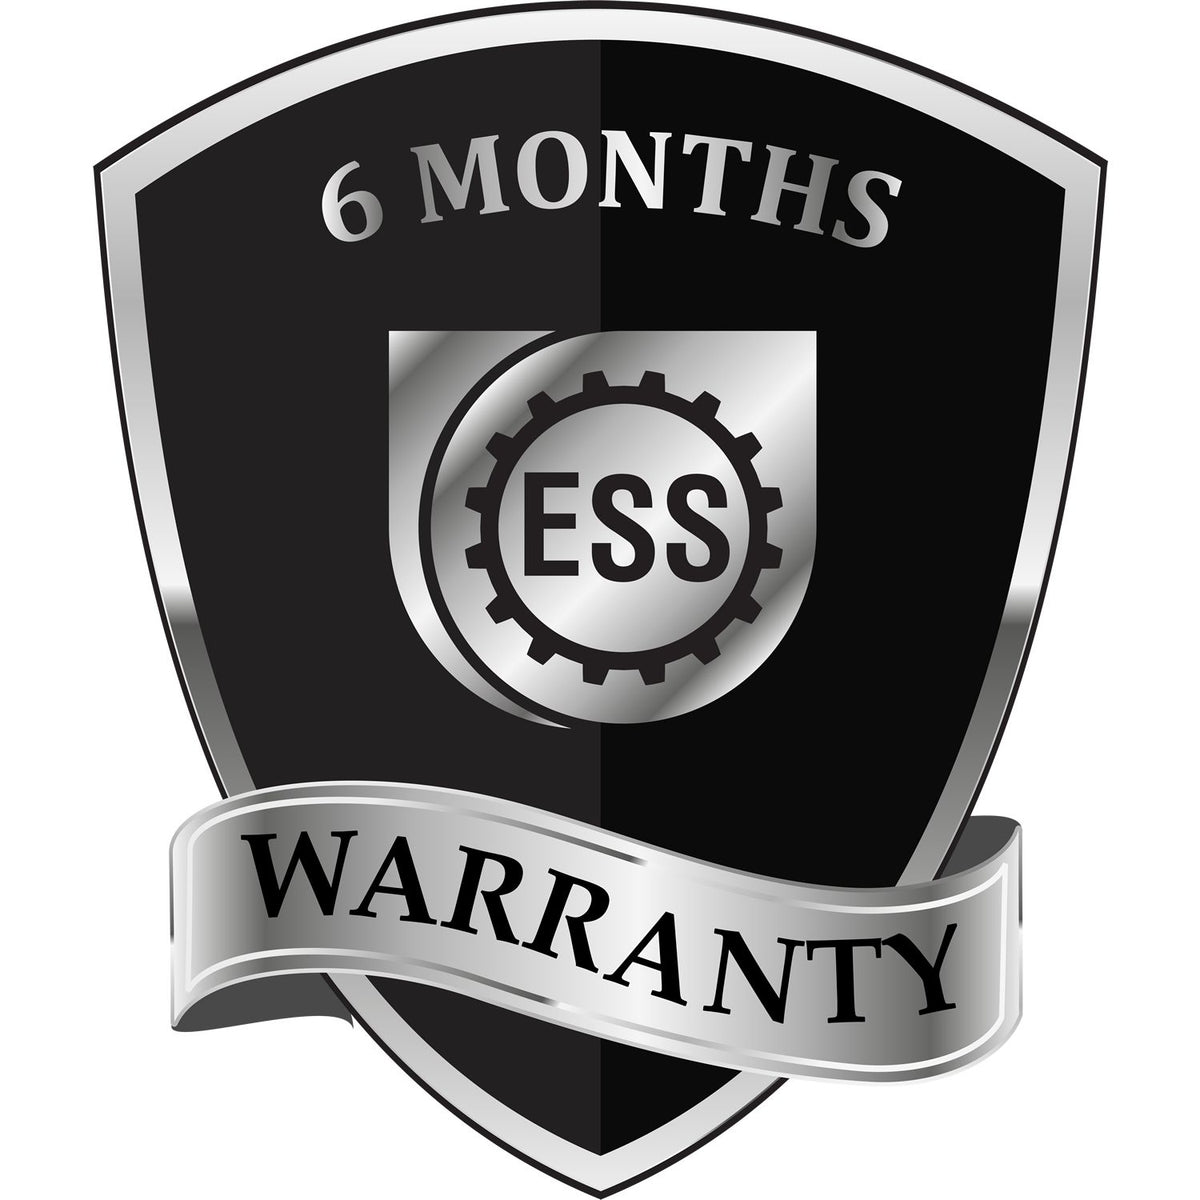 A badge or emblem showing a warranty icon for the Georgia Professional Engineer Seal Stamp